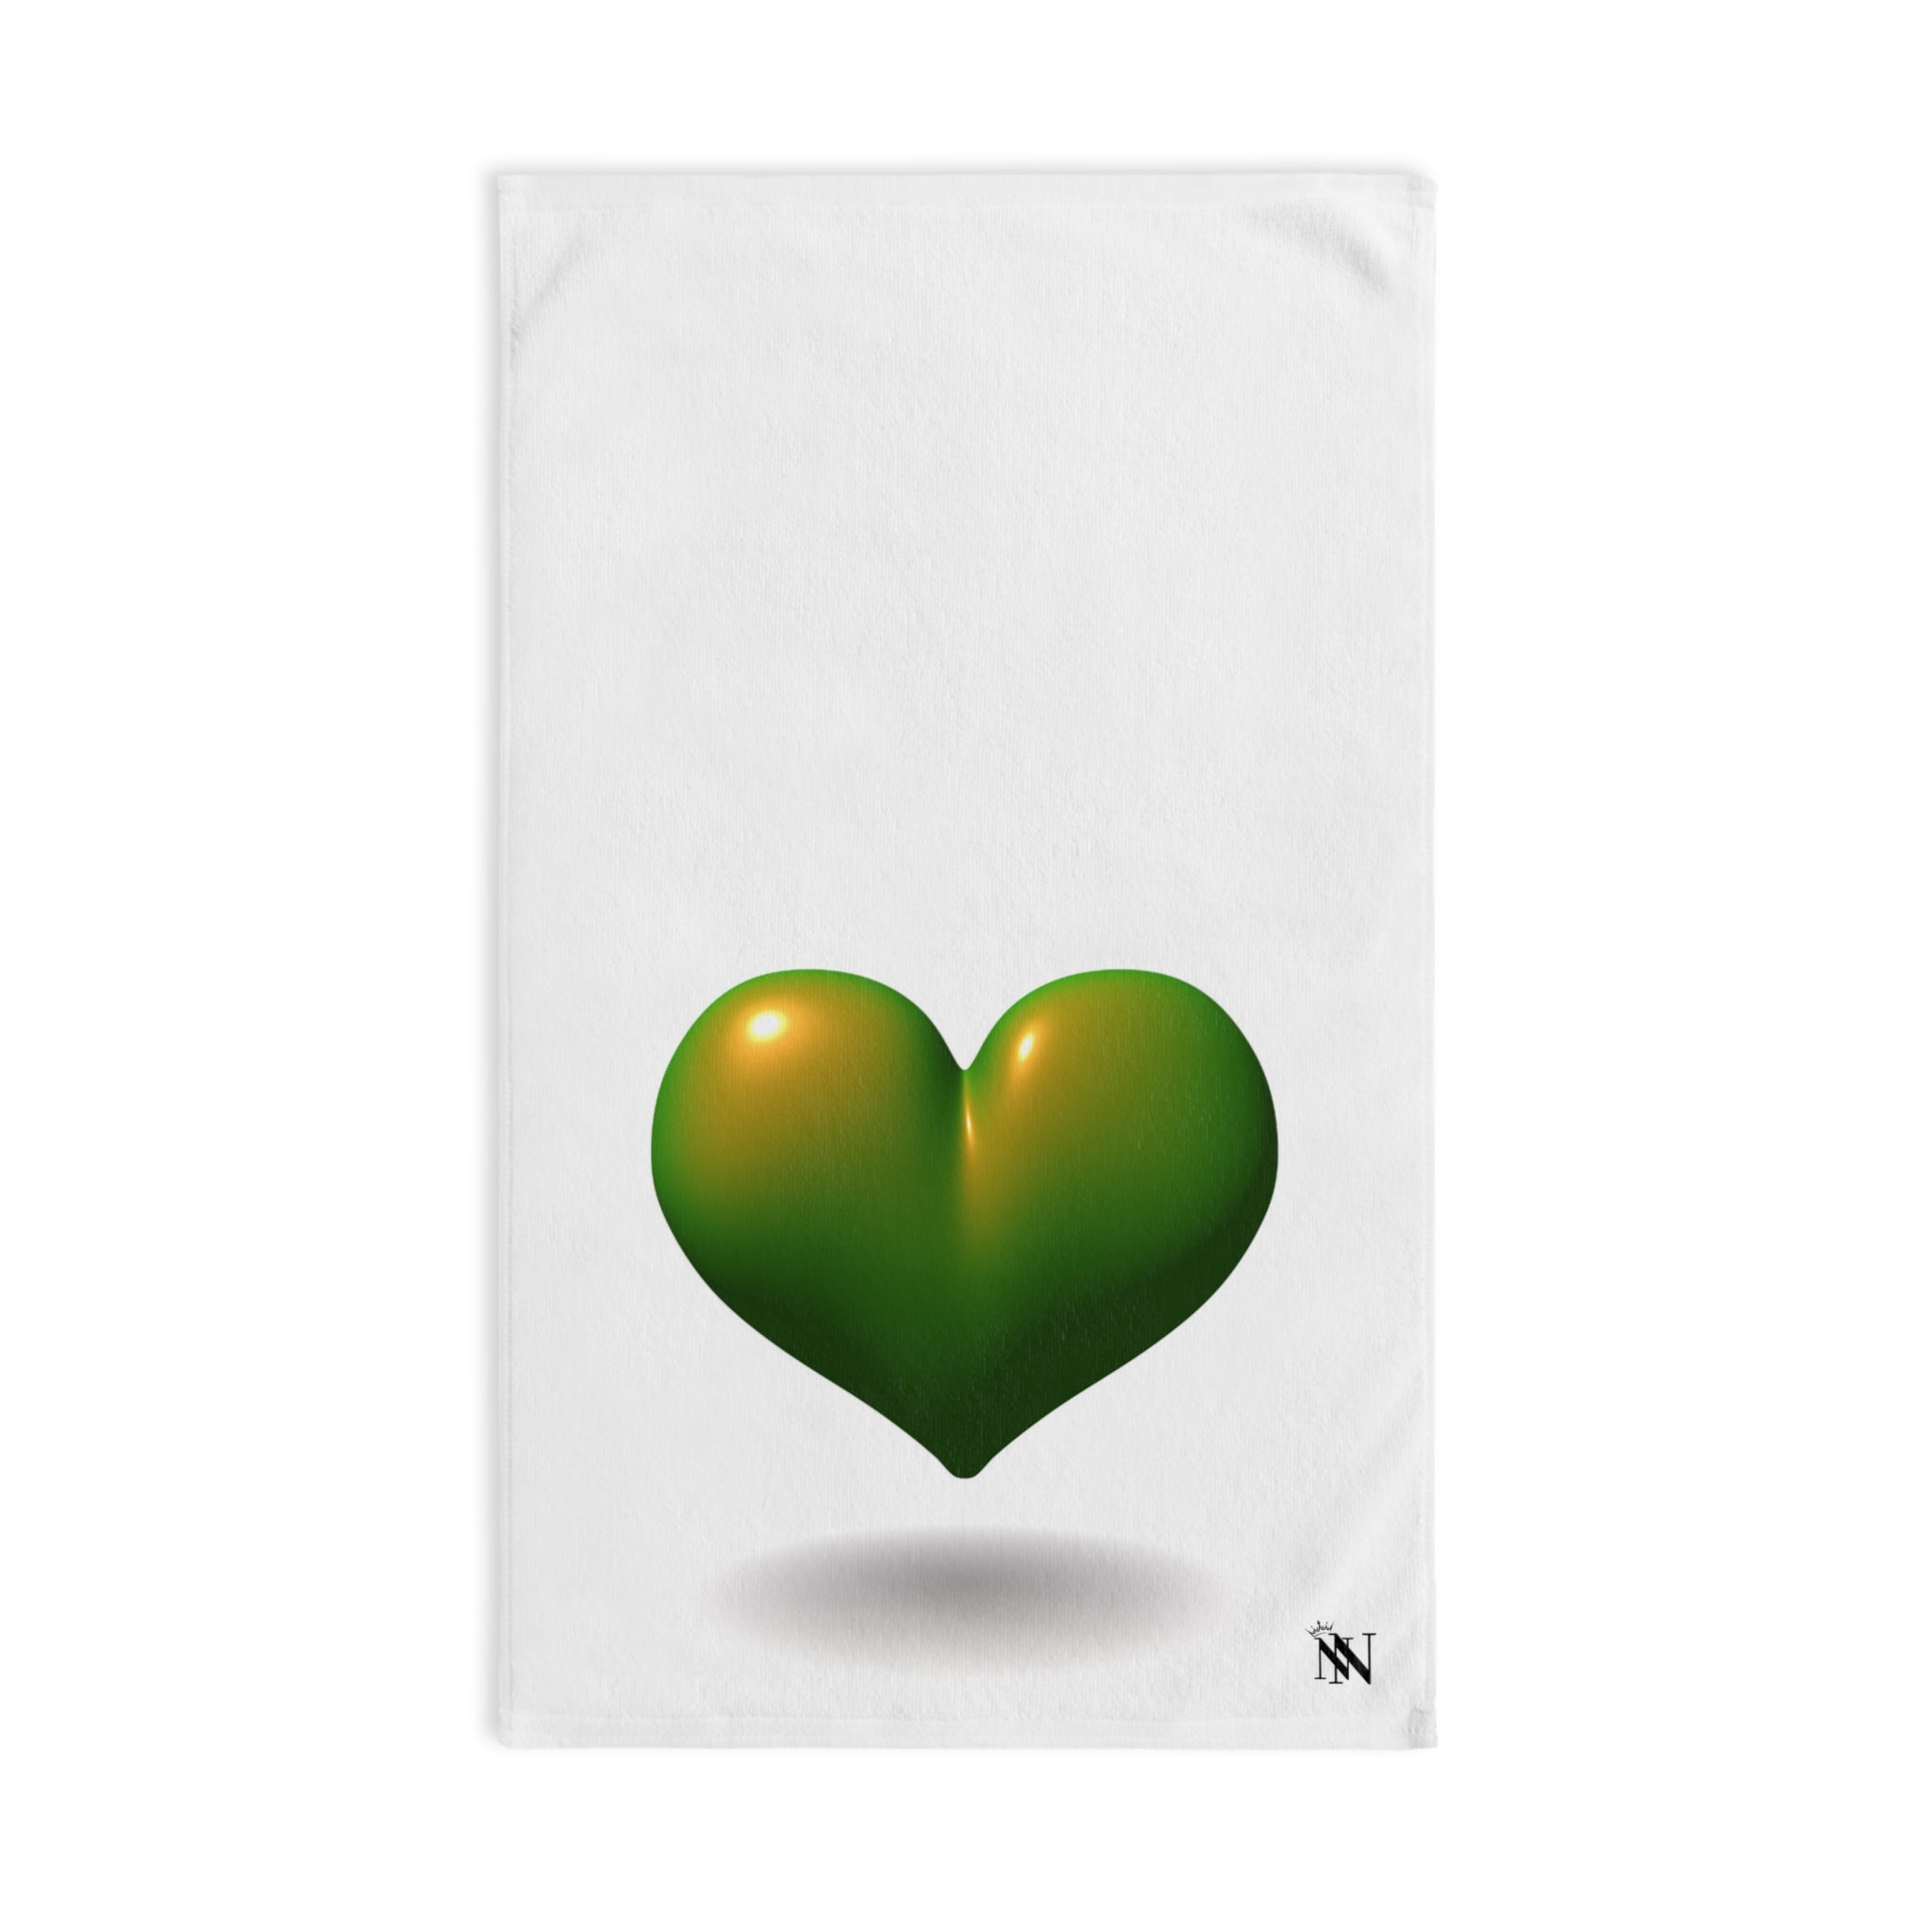 Green Shadow Heart White | Funny Gifts for Men - Gifts for Him - Birthday Gifts for Men, Him, Her, Husband, Boyfriend, Girlfriend, New Couple Gifts, Fathers & Valentines Day Gifts, Christmas Gifts NECTAR NAPKINS